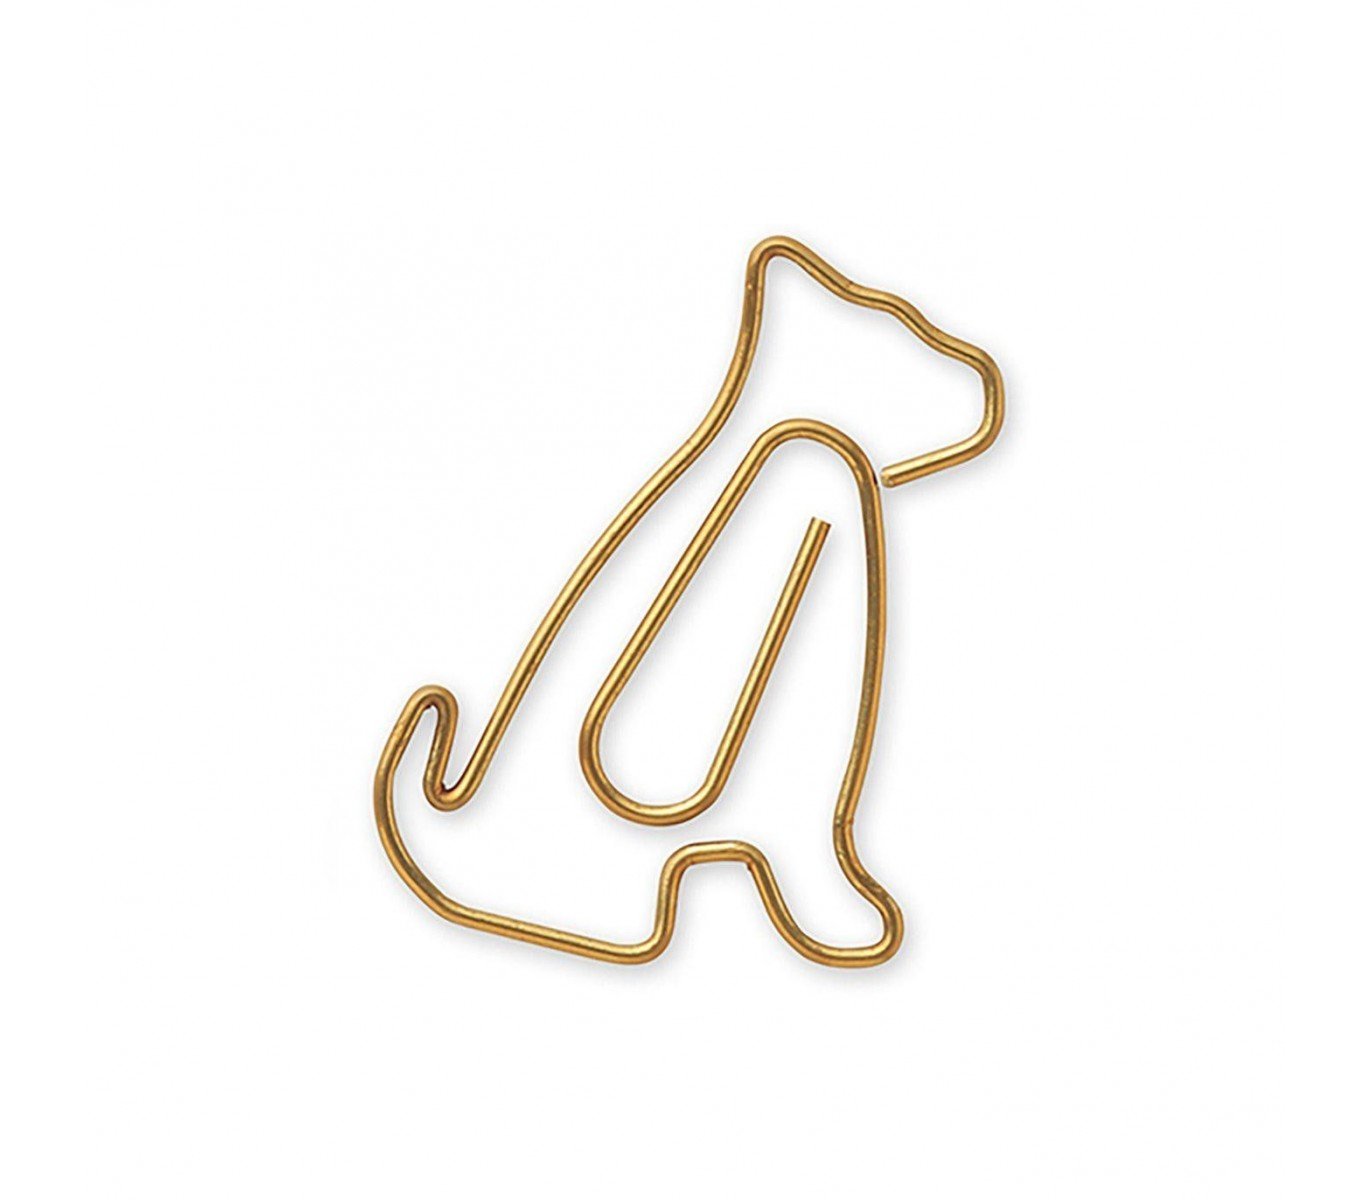 Paper clip in a dog shape, from the japanese stationery brand Midori. The color is gold.